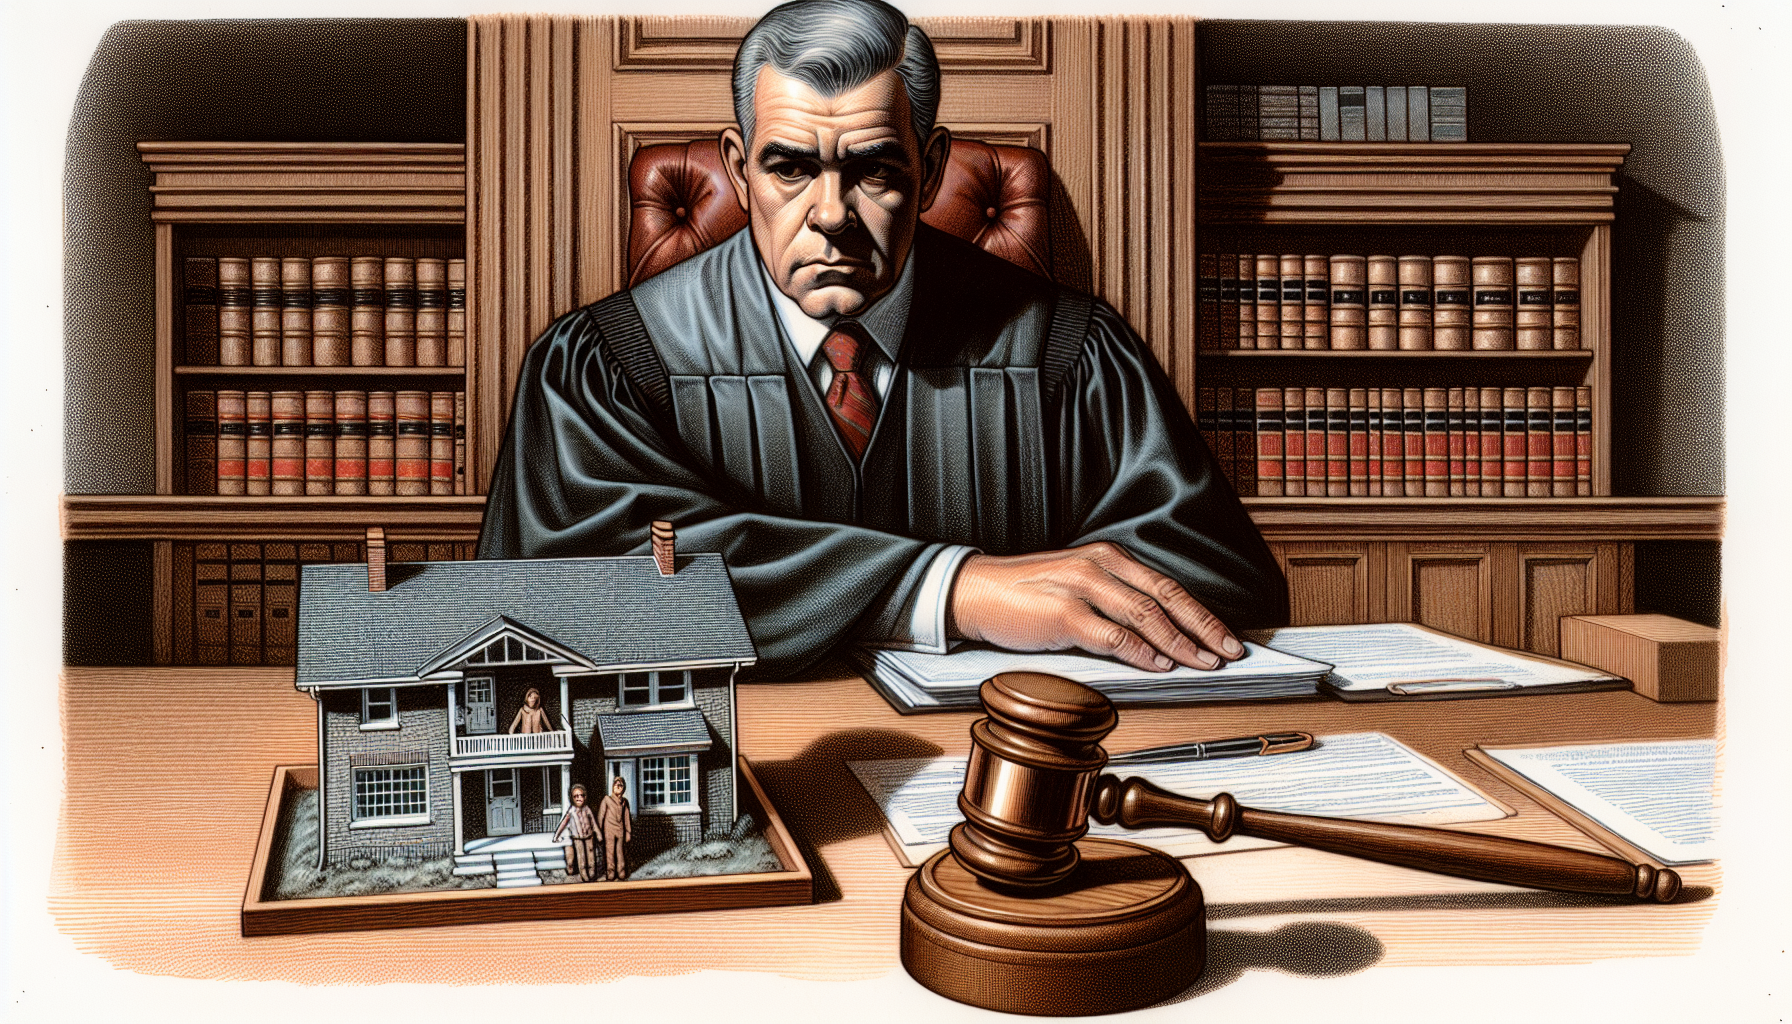 Illustration of a judge with a gavel making custodial decisions